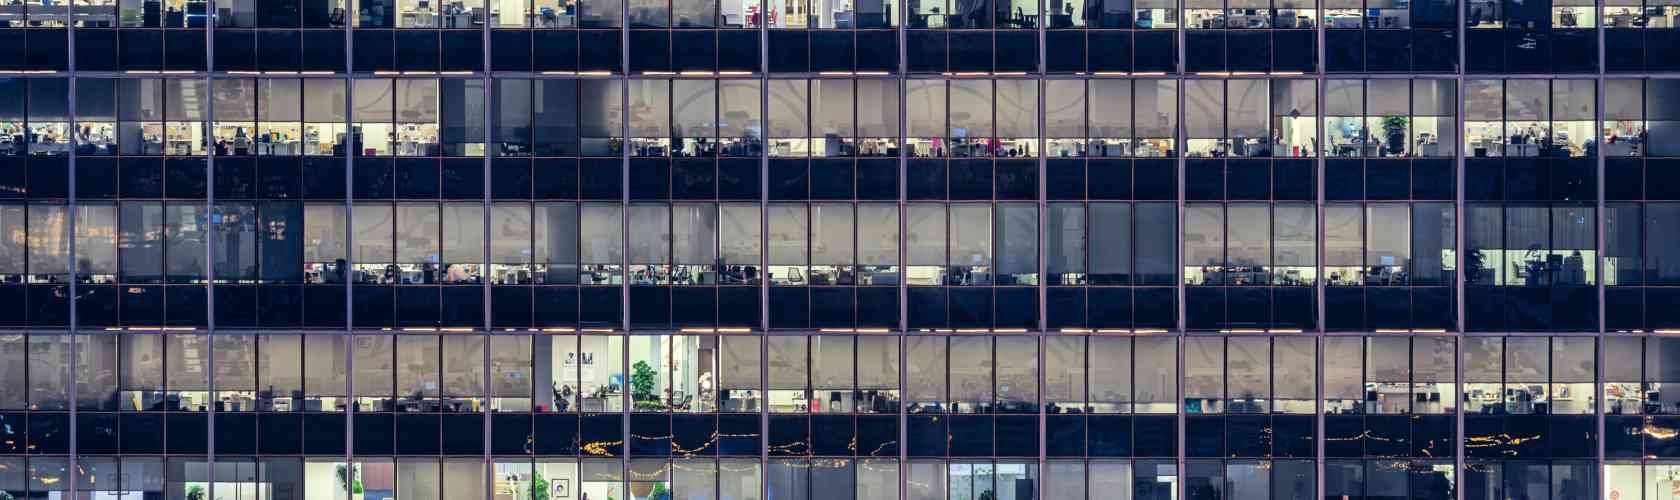 Office windows in the city